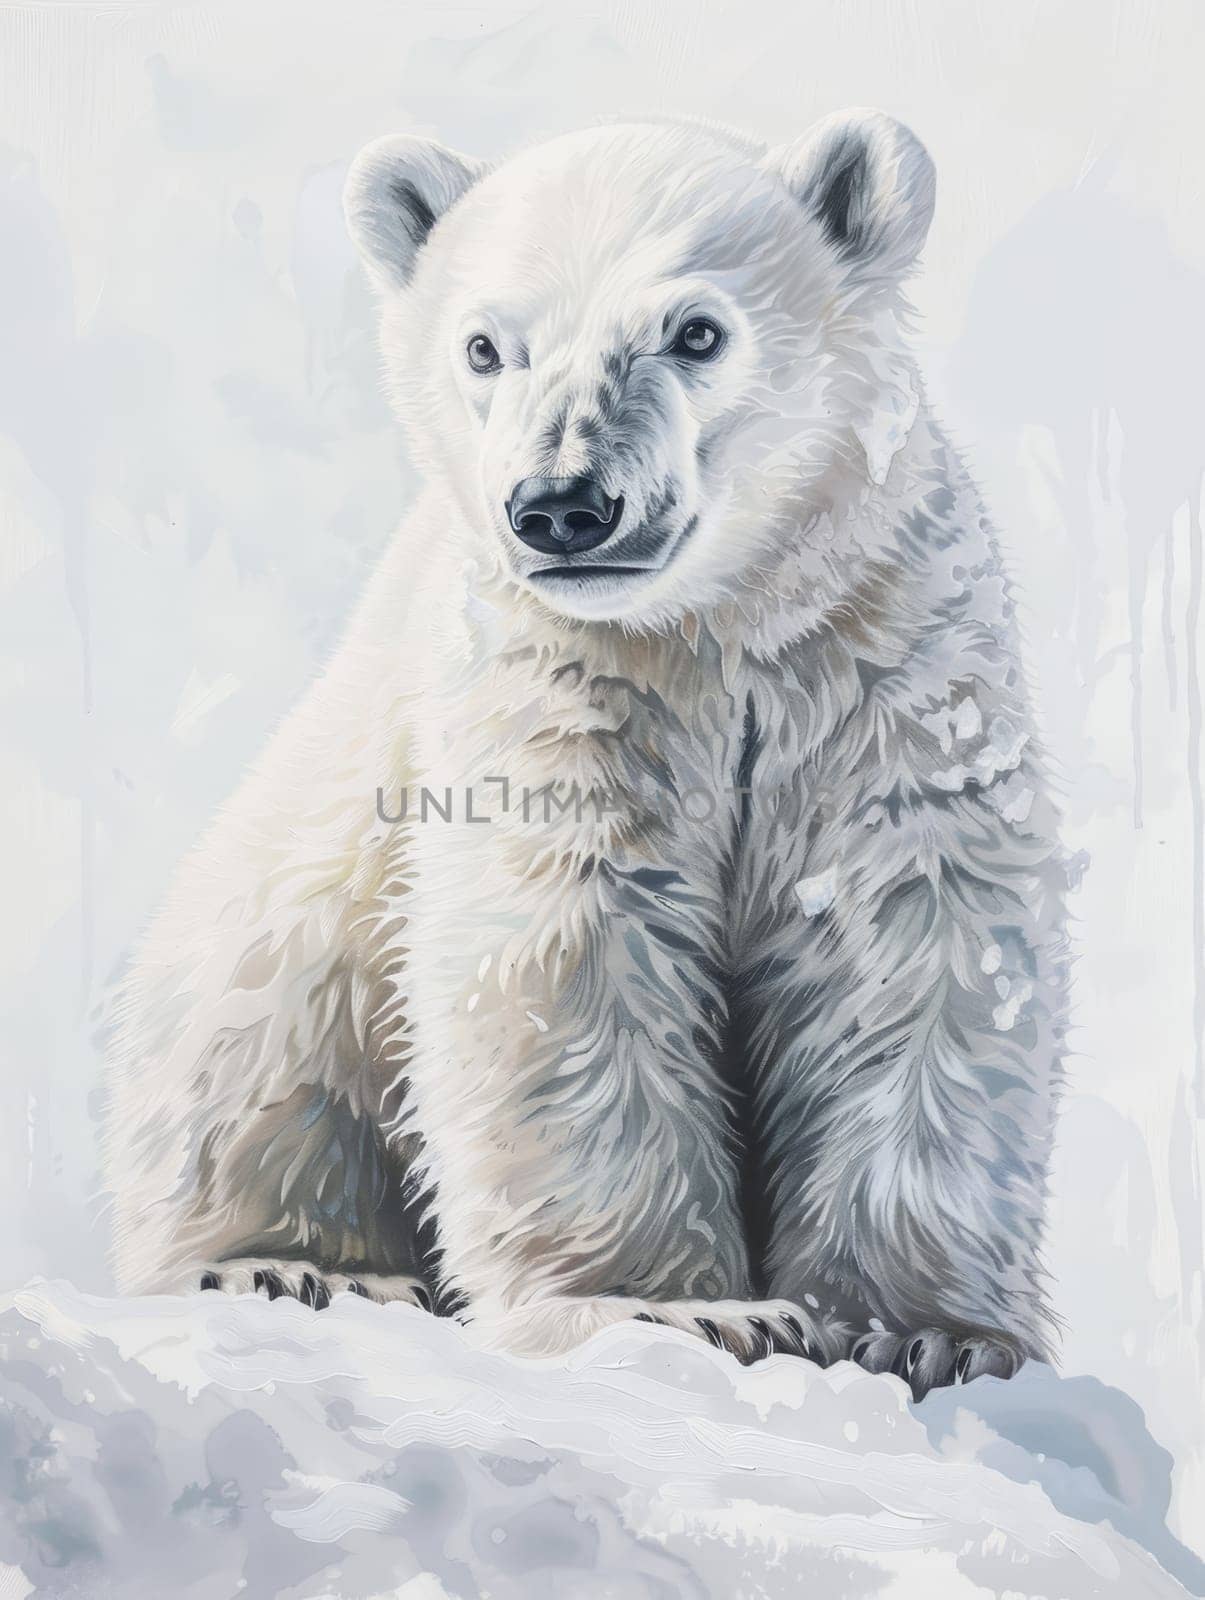 An artistic rendition of a polar bear, depicted with brush strokes that capture the animal's essence amidst a winter setting